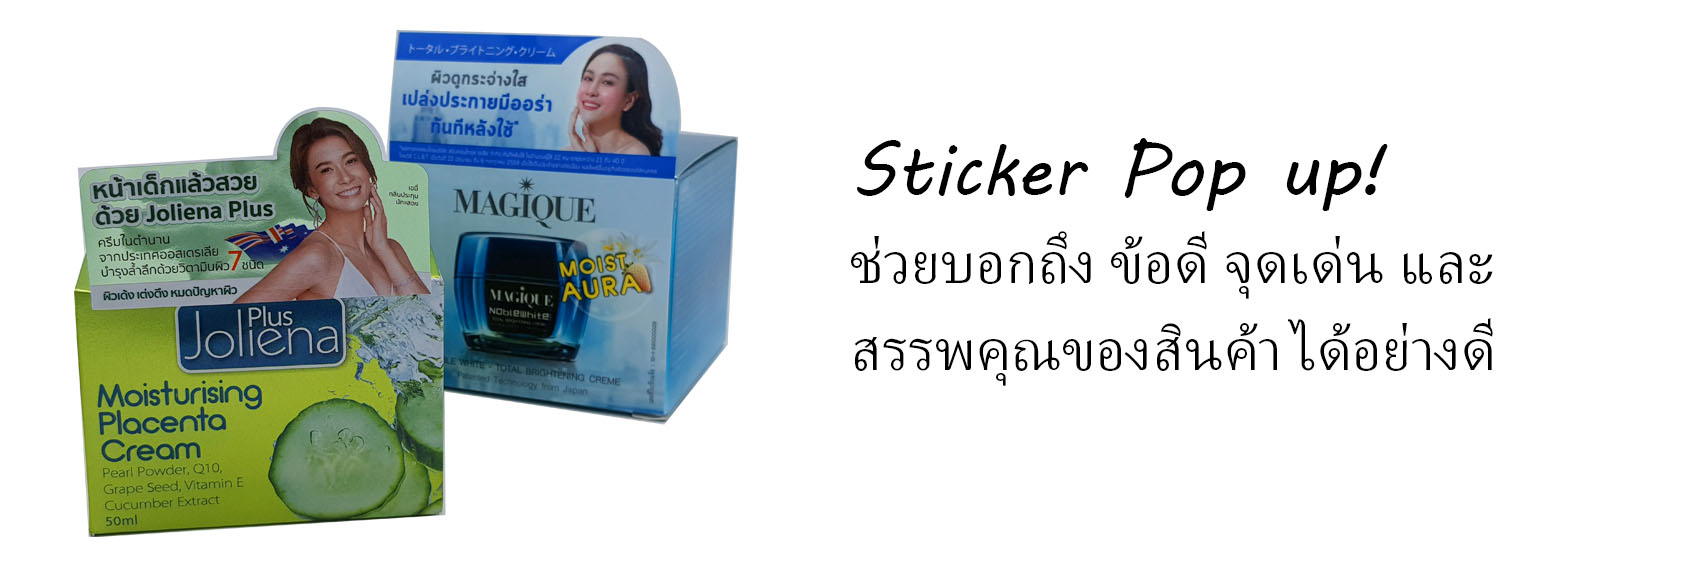 Stkpopup-web-slide-pic